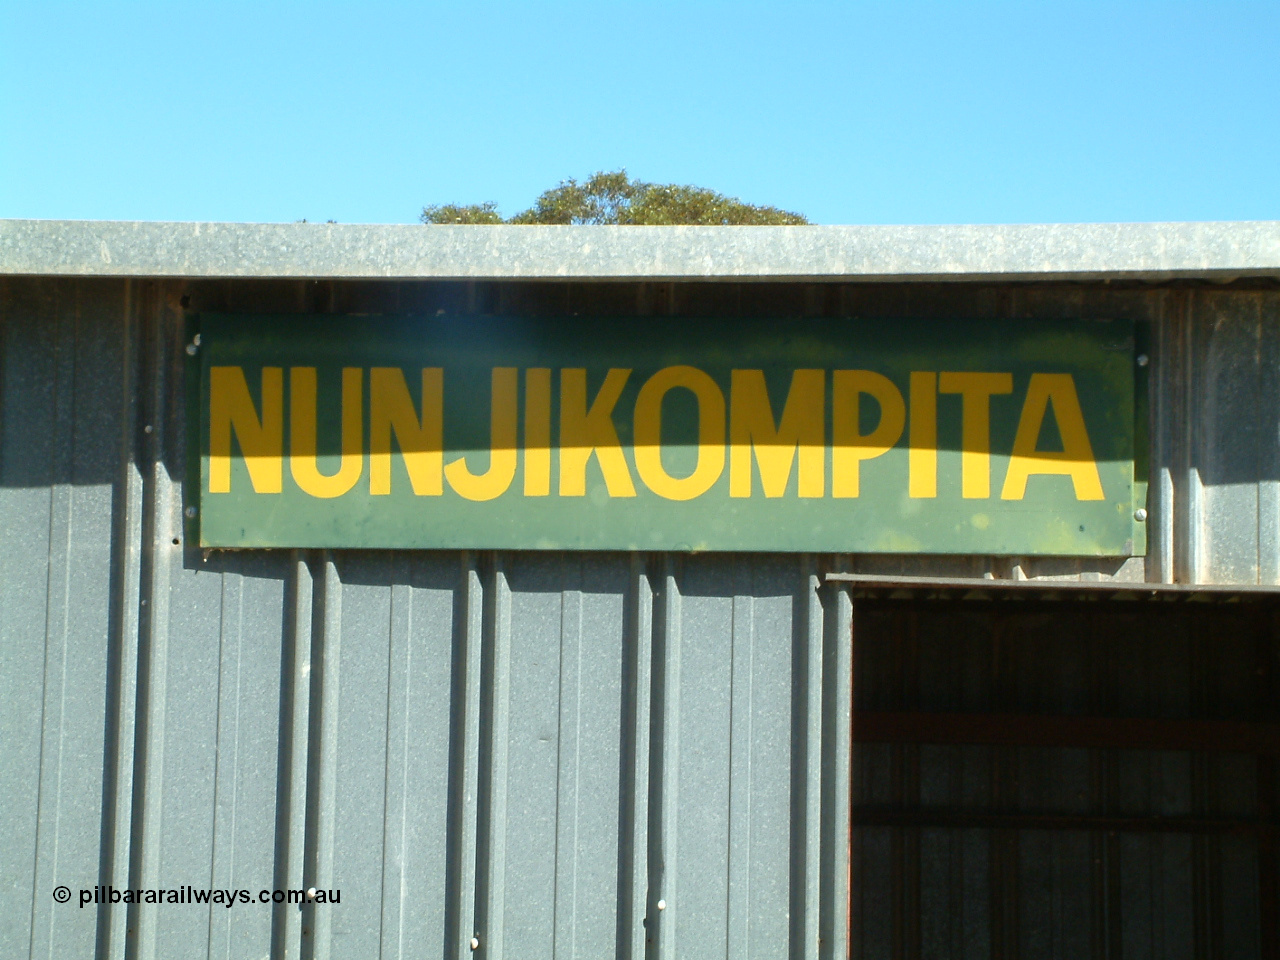 030411 141355
Nunjikompita, aboriginal word for 'burnt hair', station sign attached to shelter shed.
